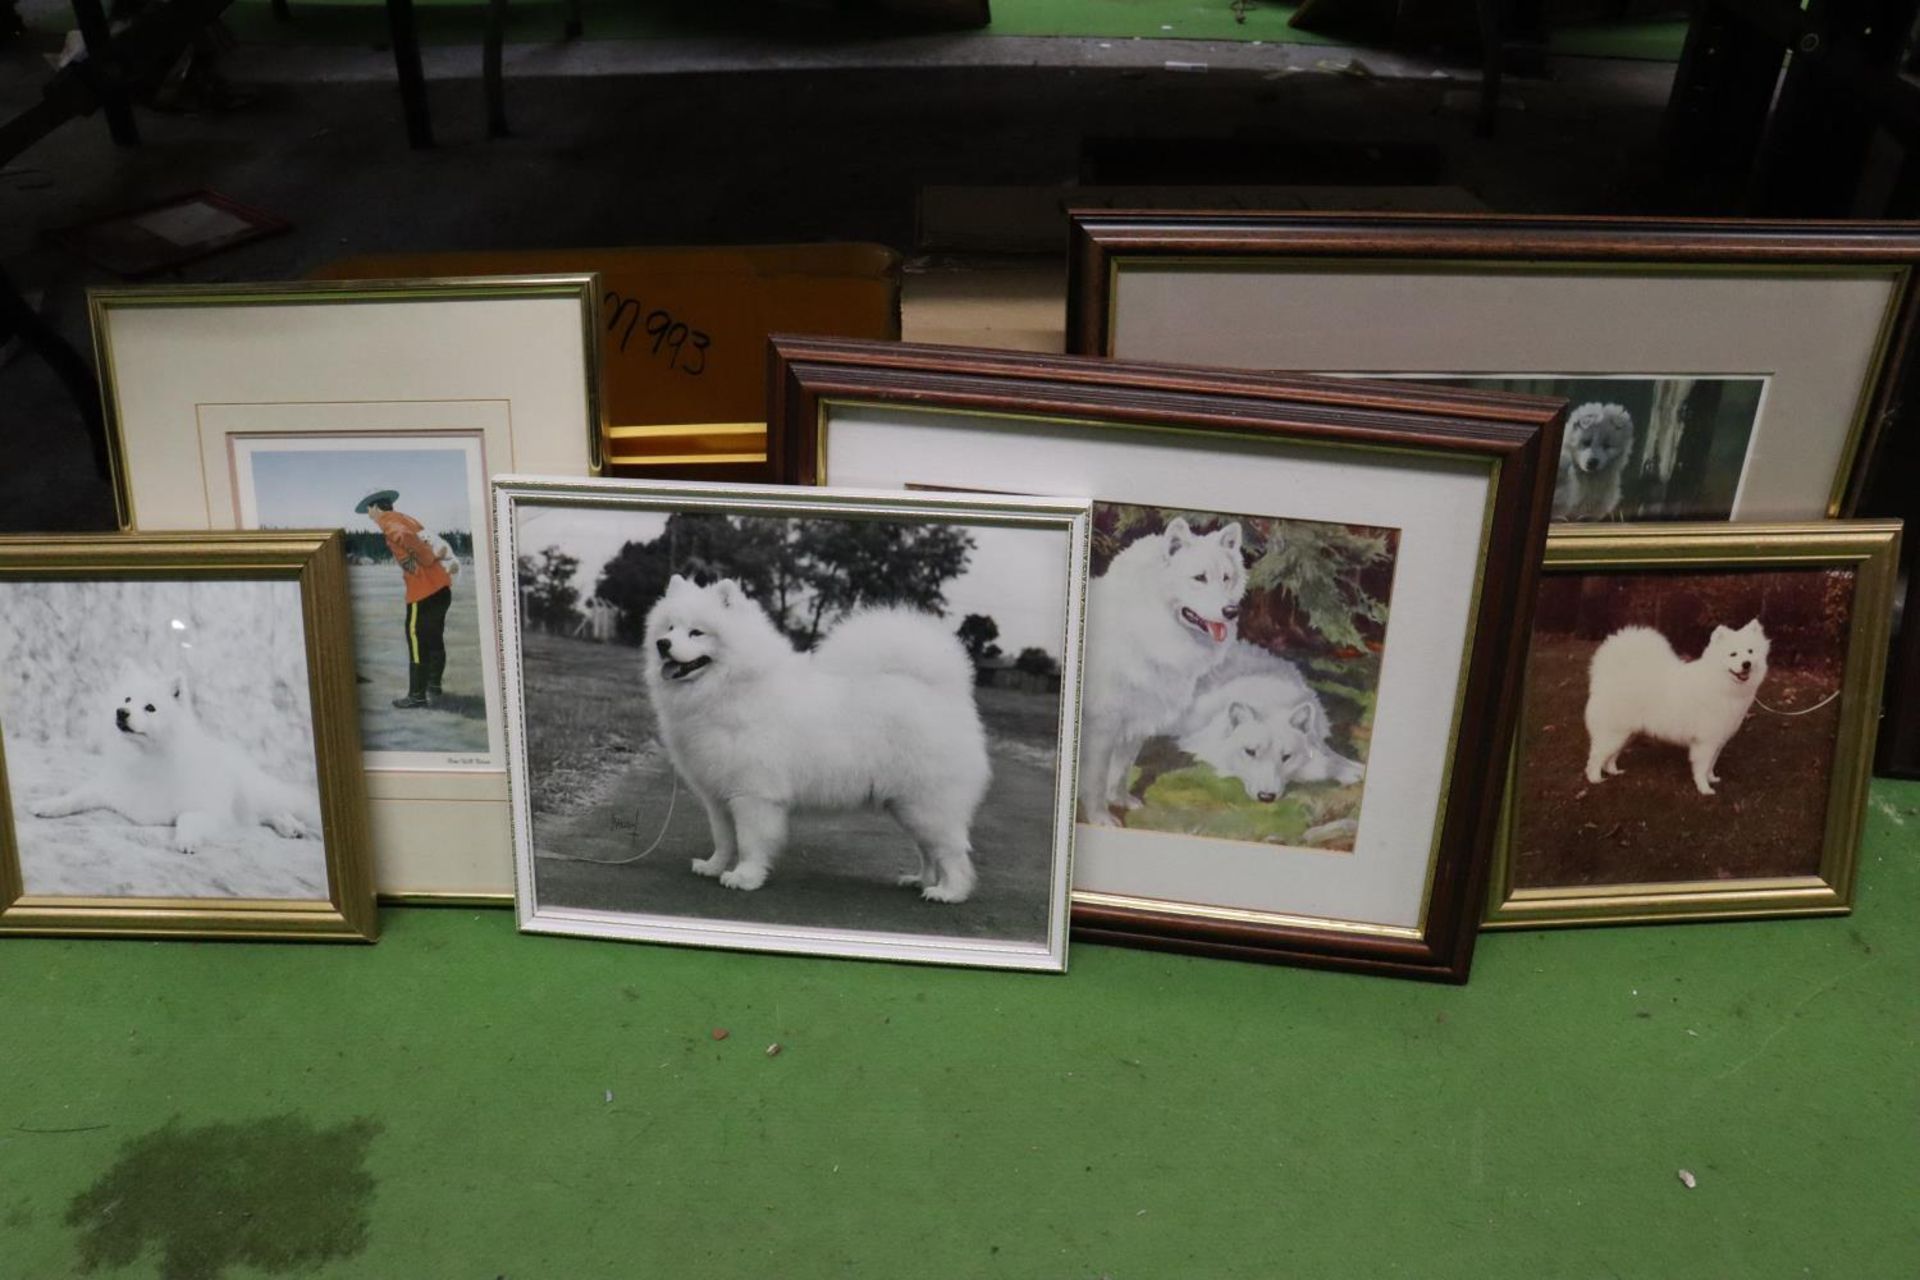 A QUANTITY OF PRINTS AND PHOTOGRAPHS FEATURING WHITE HUSKY DOGS - 6 IN TOTAL